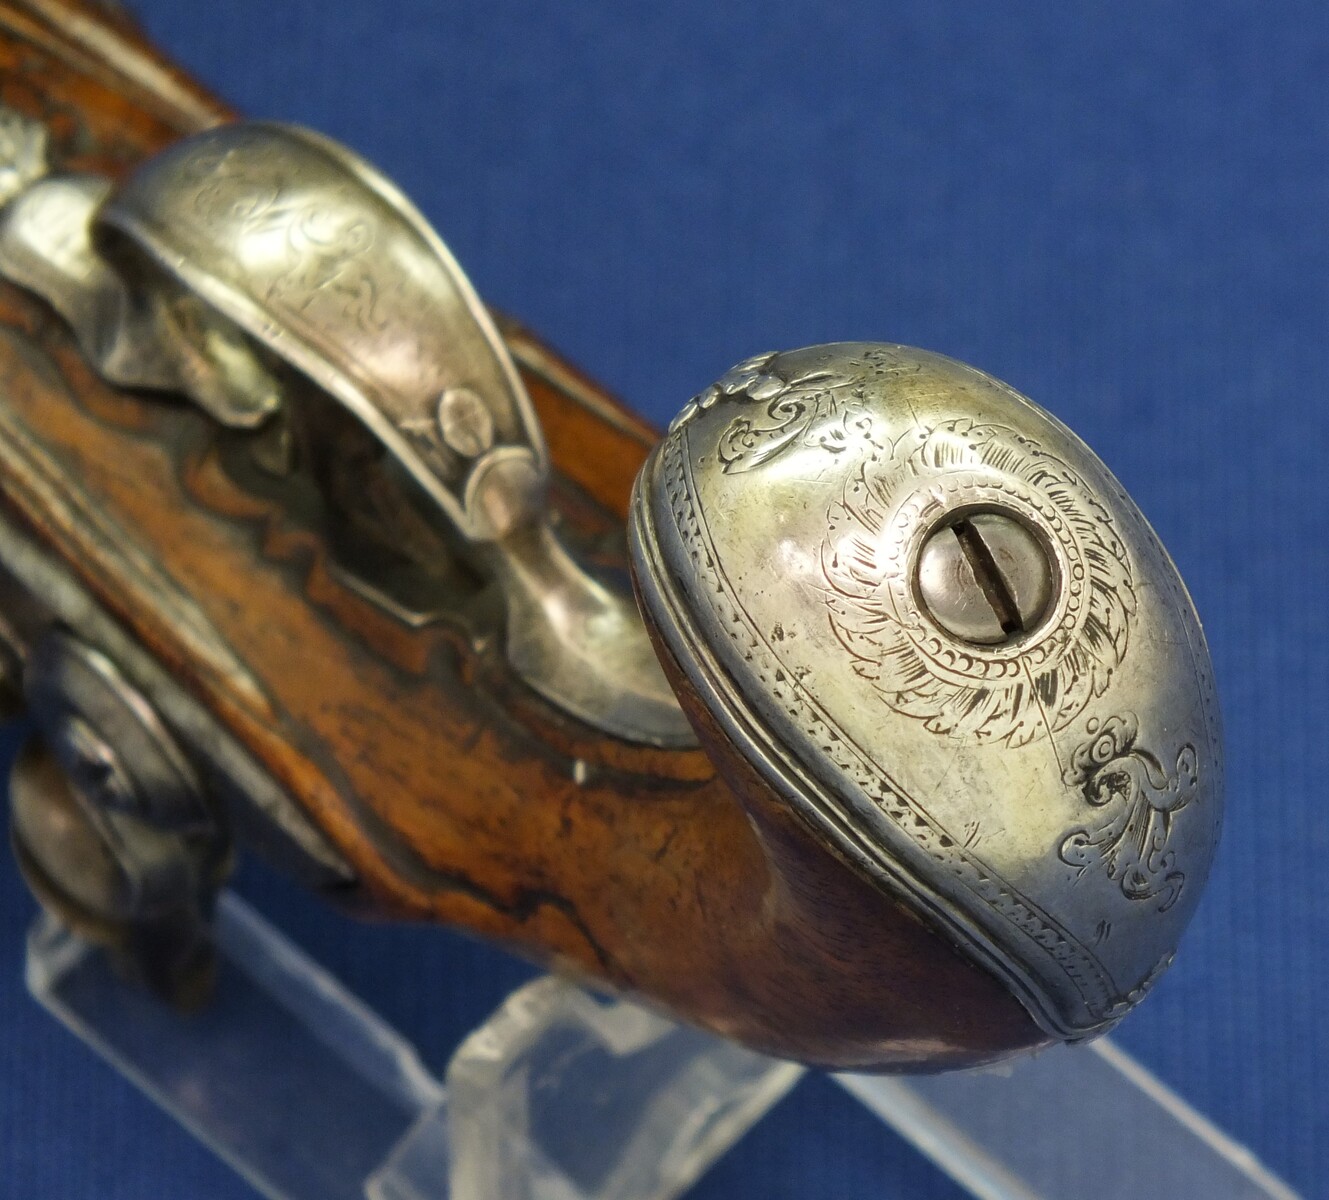 A fine antique 18th century French Silver mounted small Flintlock Pocket pistol circa 1760. Caliber 10mm rifled, length 18,5cm. In very good condition. Price 1.250 euro.